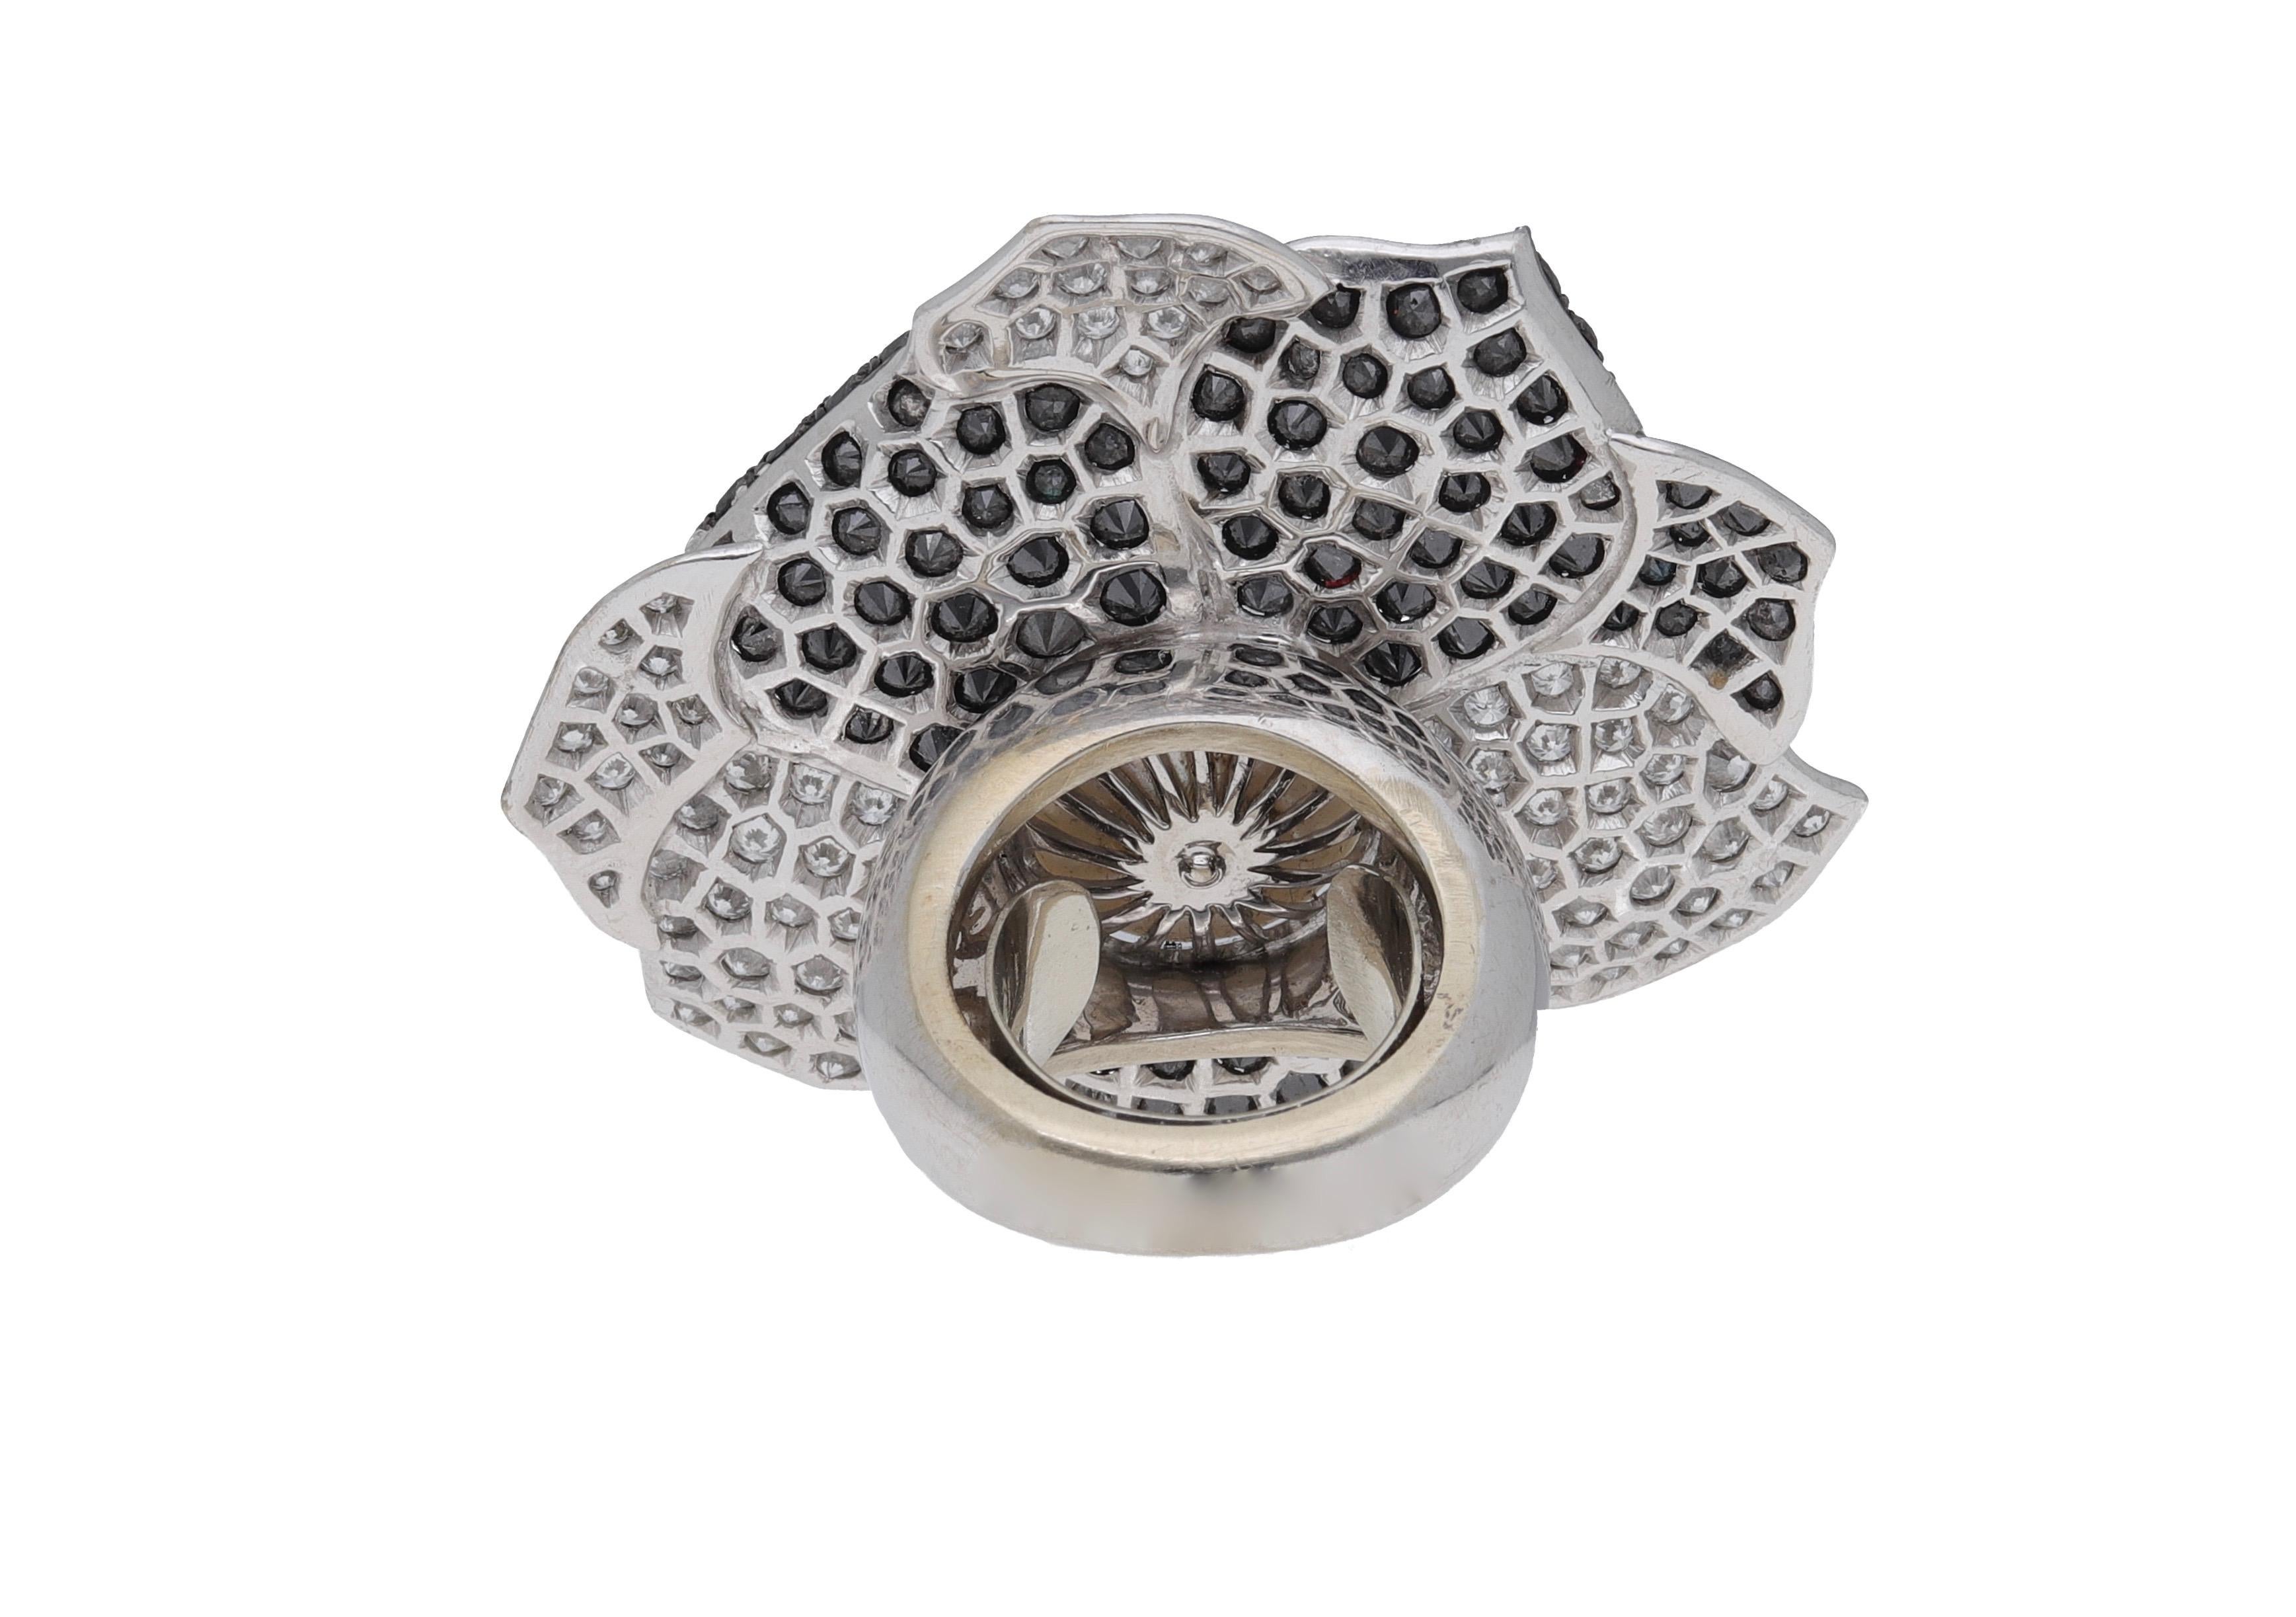 18 Kt. white gold ring with black & white diamonds and South sea round pearl.
This impressive ring is designed as a flower.
Black diamonds: 7.00 carat
Diamonds: 6.00 carat 
South sea pearl: 16 mm. 
This ring is completely hand-made in Italy and has